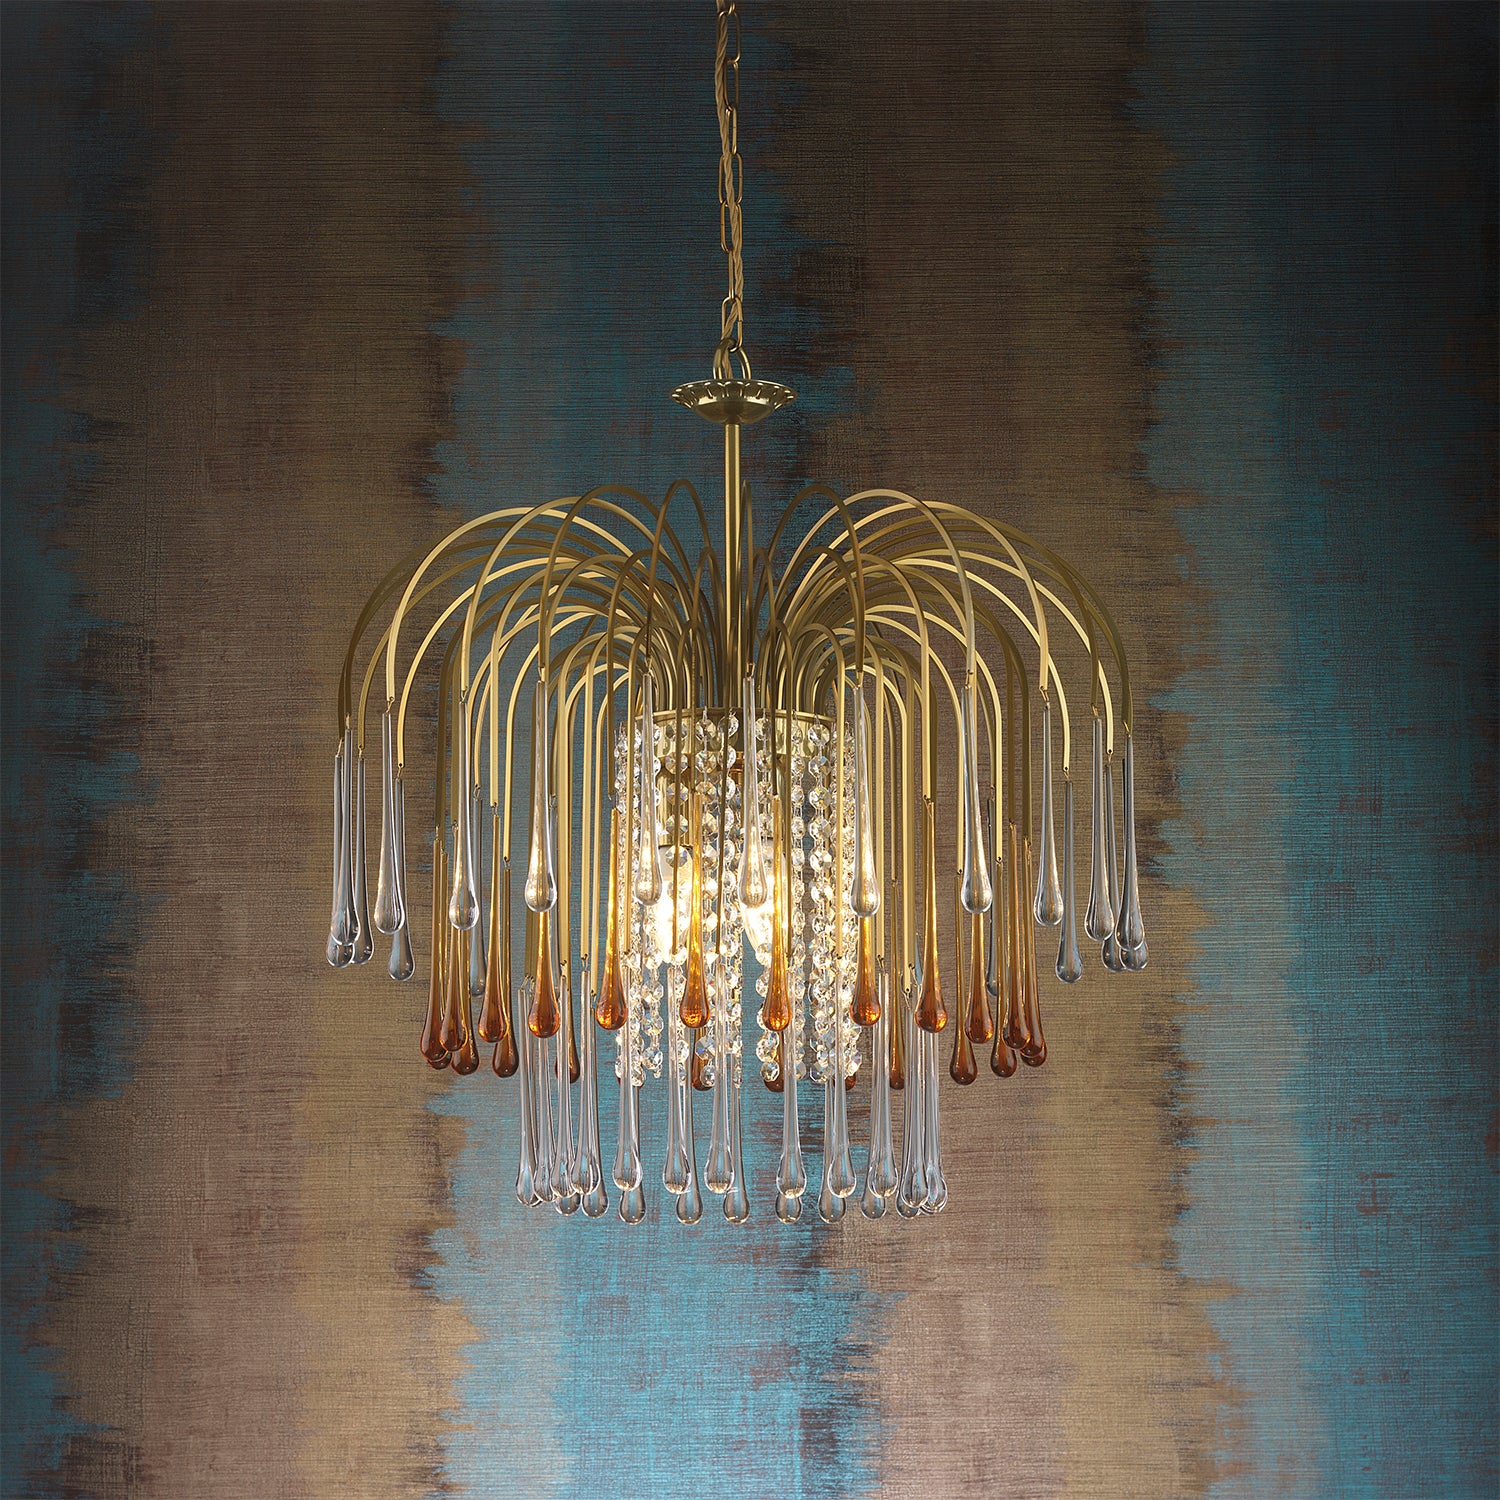 Bespoke Made to Order Chandeliers